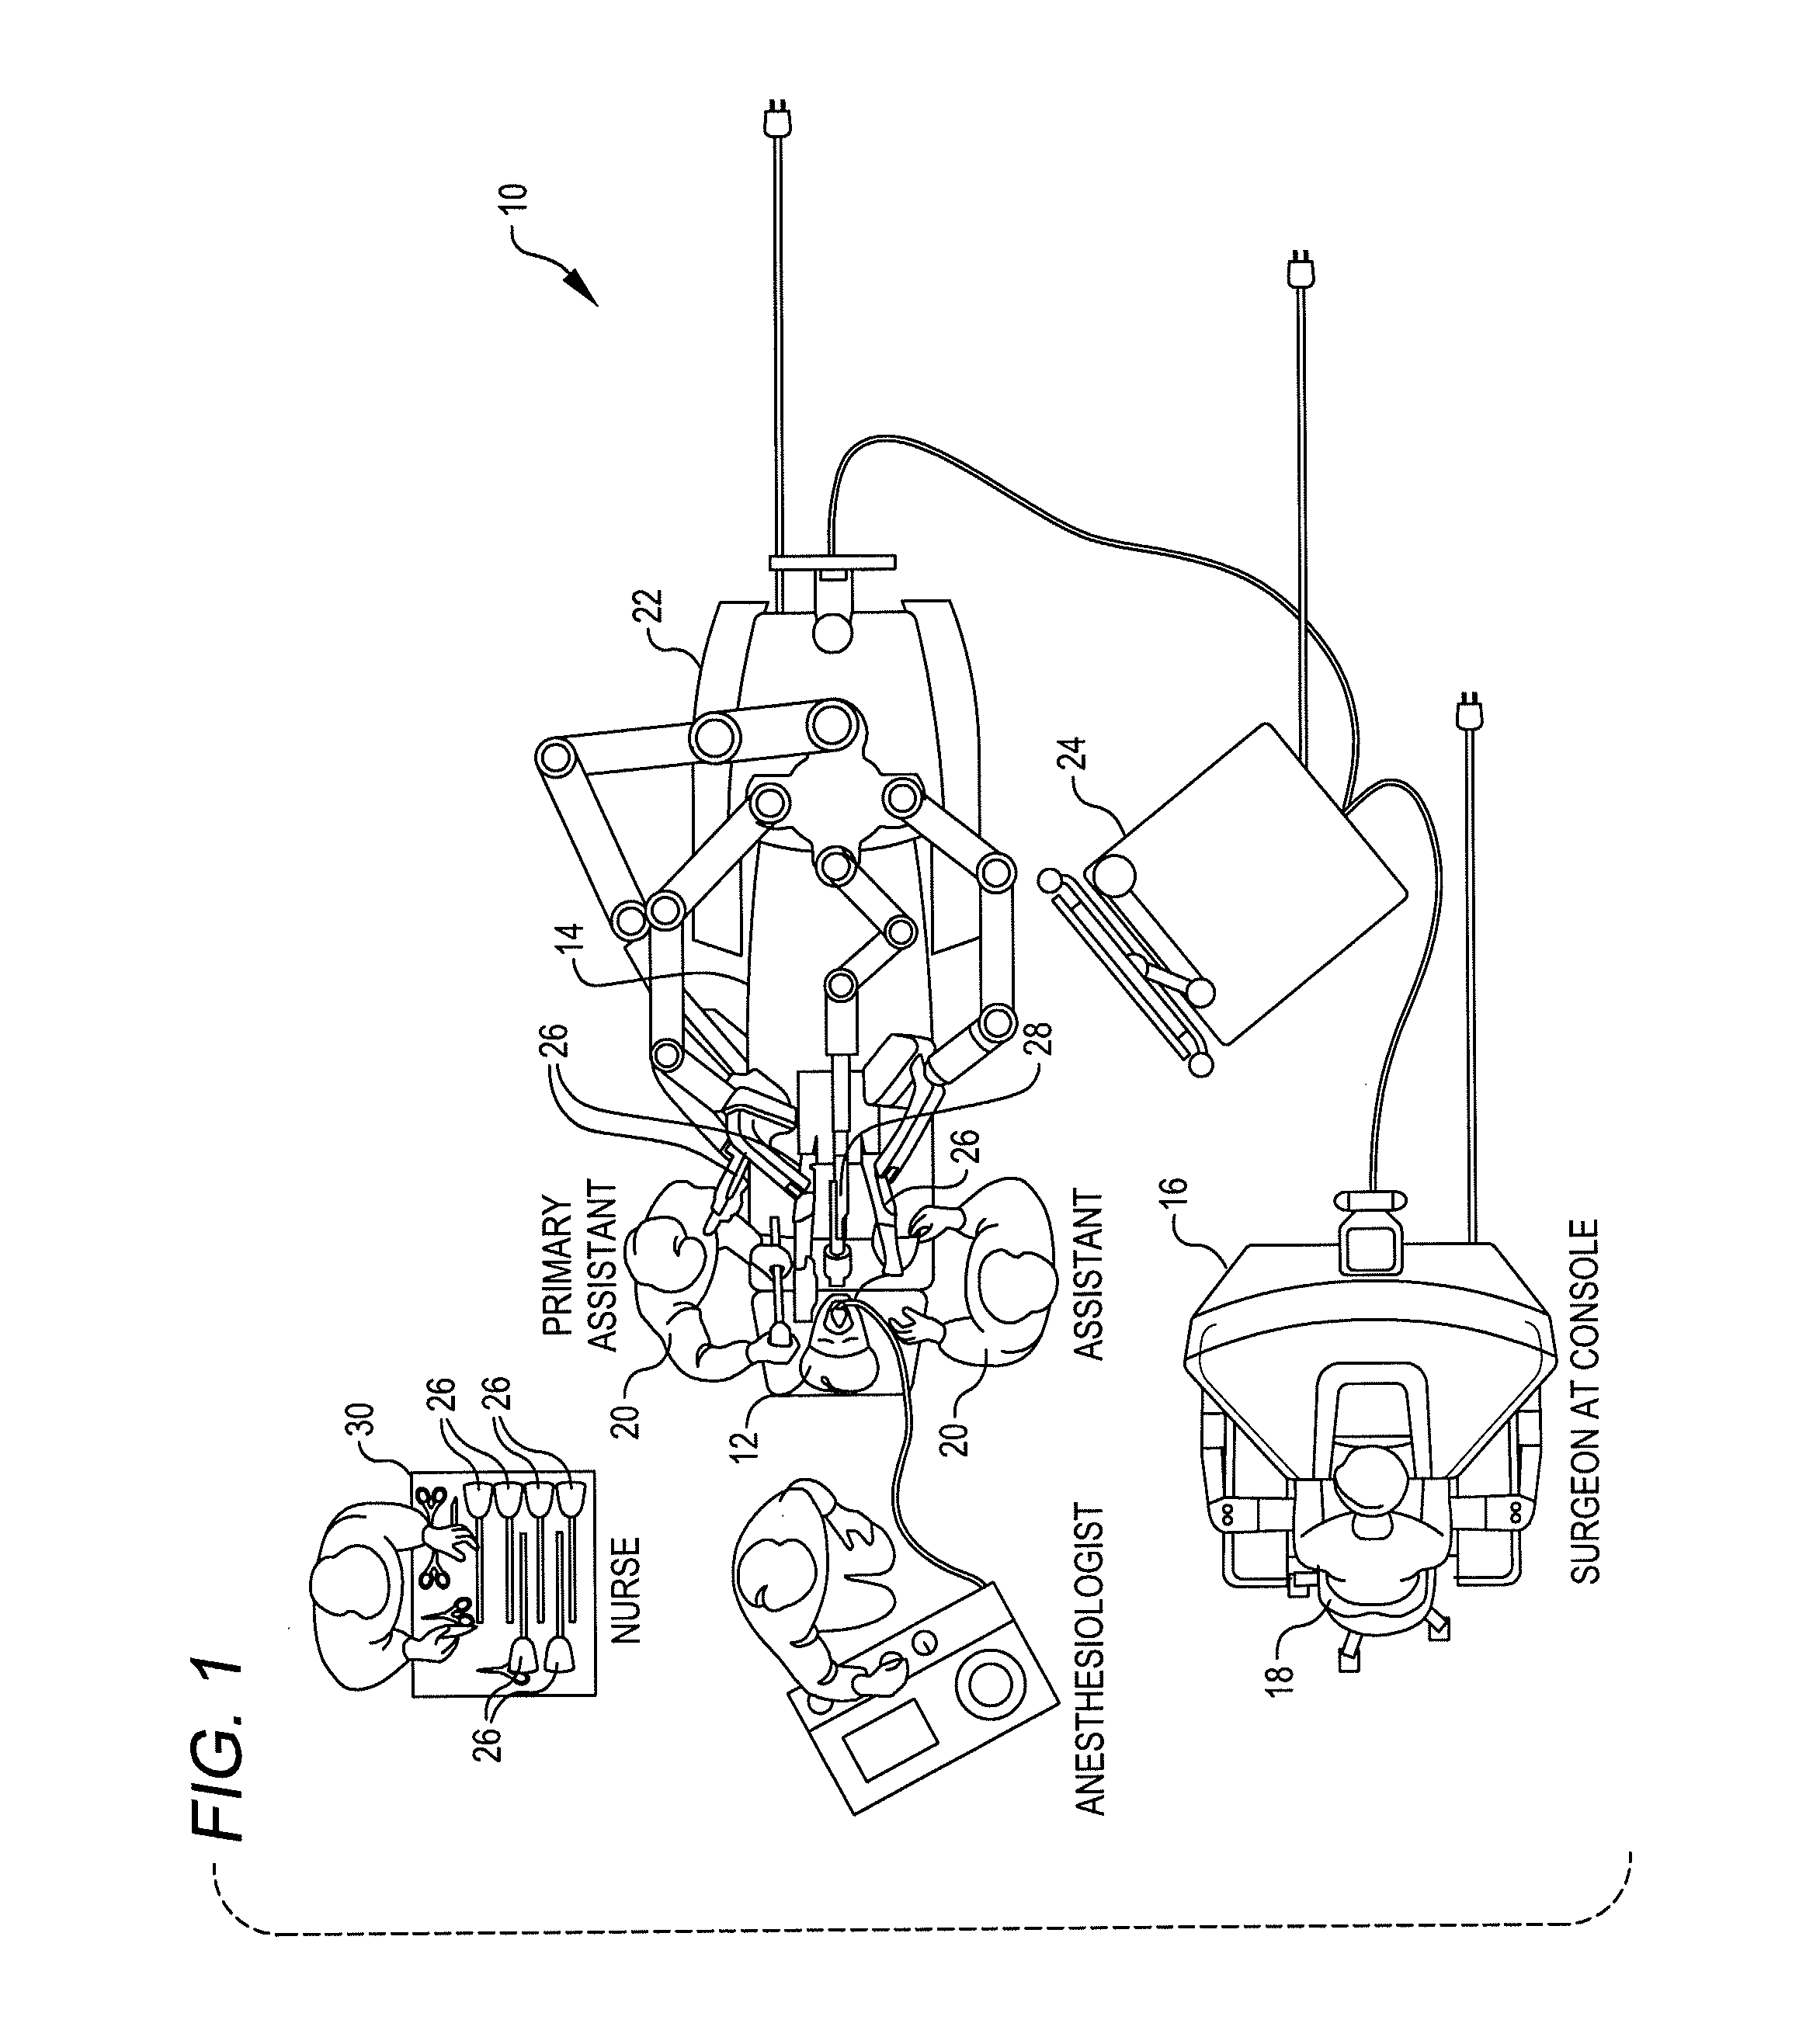 Surgical instrument with single drive input for two end effector mechanisms